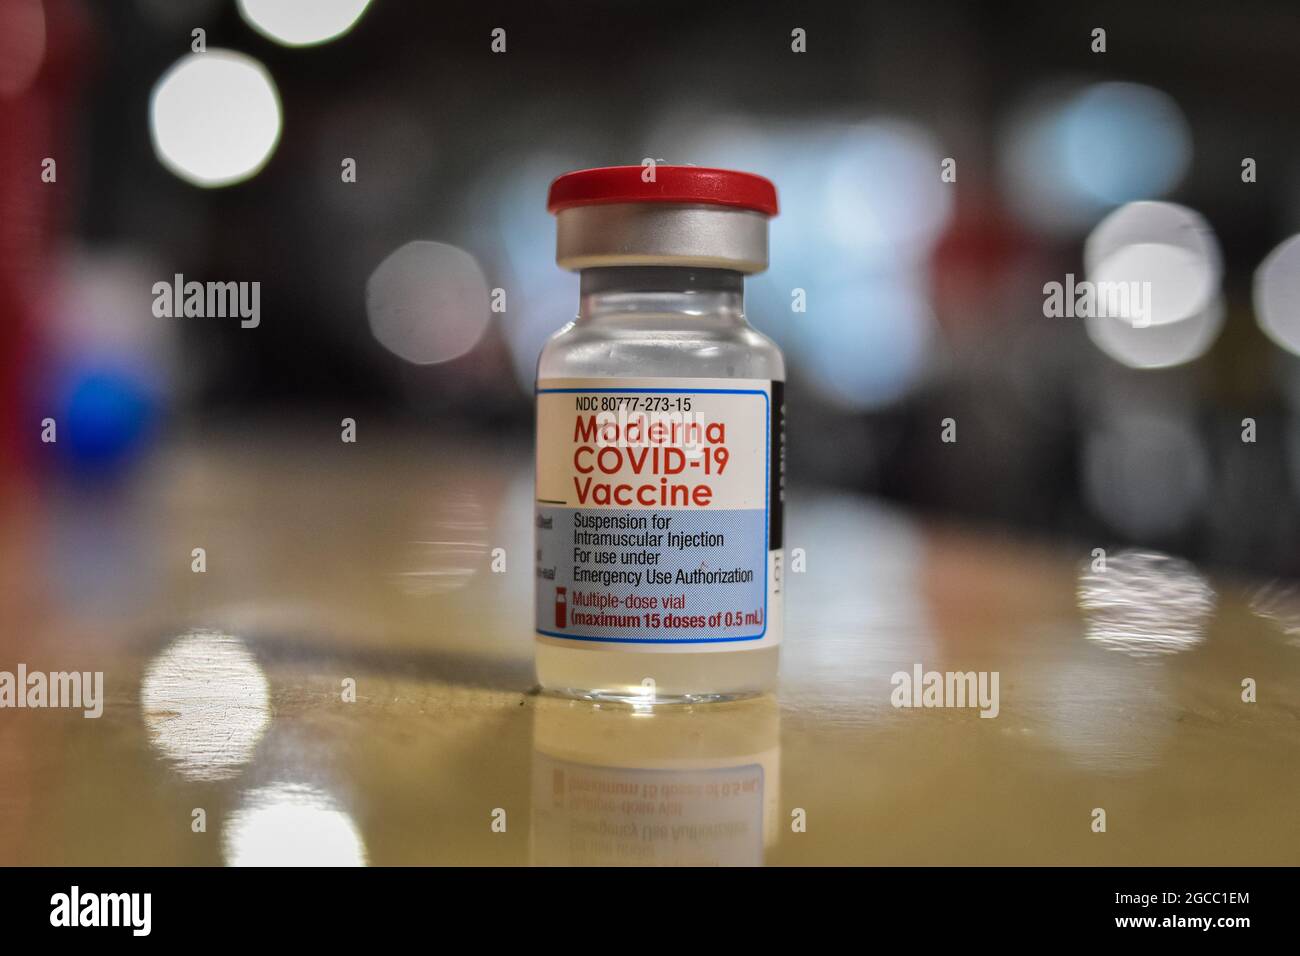 A vial of the Moderna COVID-19 Vaccine as people from ages 25 to 30 start their vaccination phase with the Moderna novel COVID-19 vaccine against the Coronavirus disease in Ipiales - Nariño, Colombia on August 2, 2021. Stock Photo